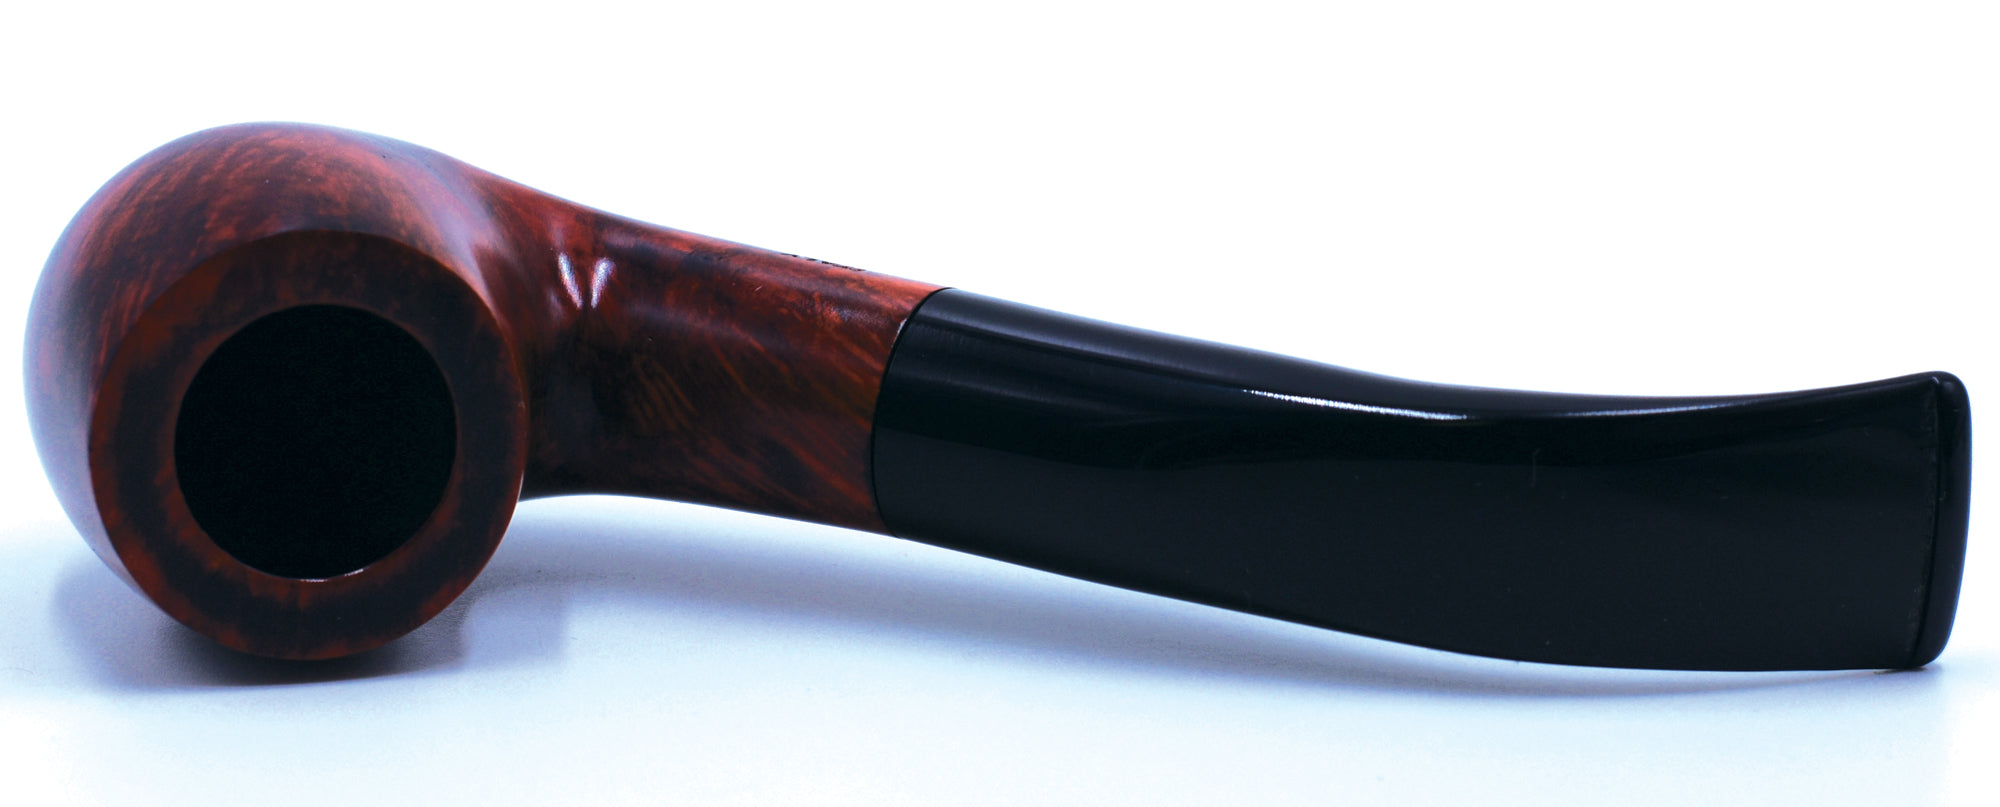 LEGENDEX® SCALADI* 9 MM Filtered Briar Smoking Pipe Made In Italy 01-08-127